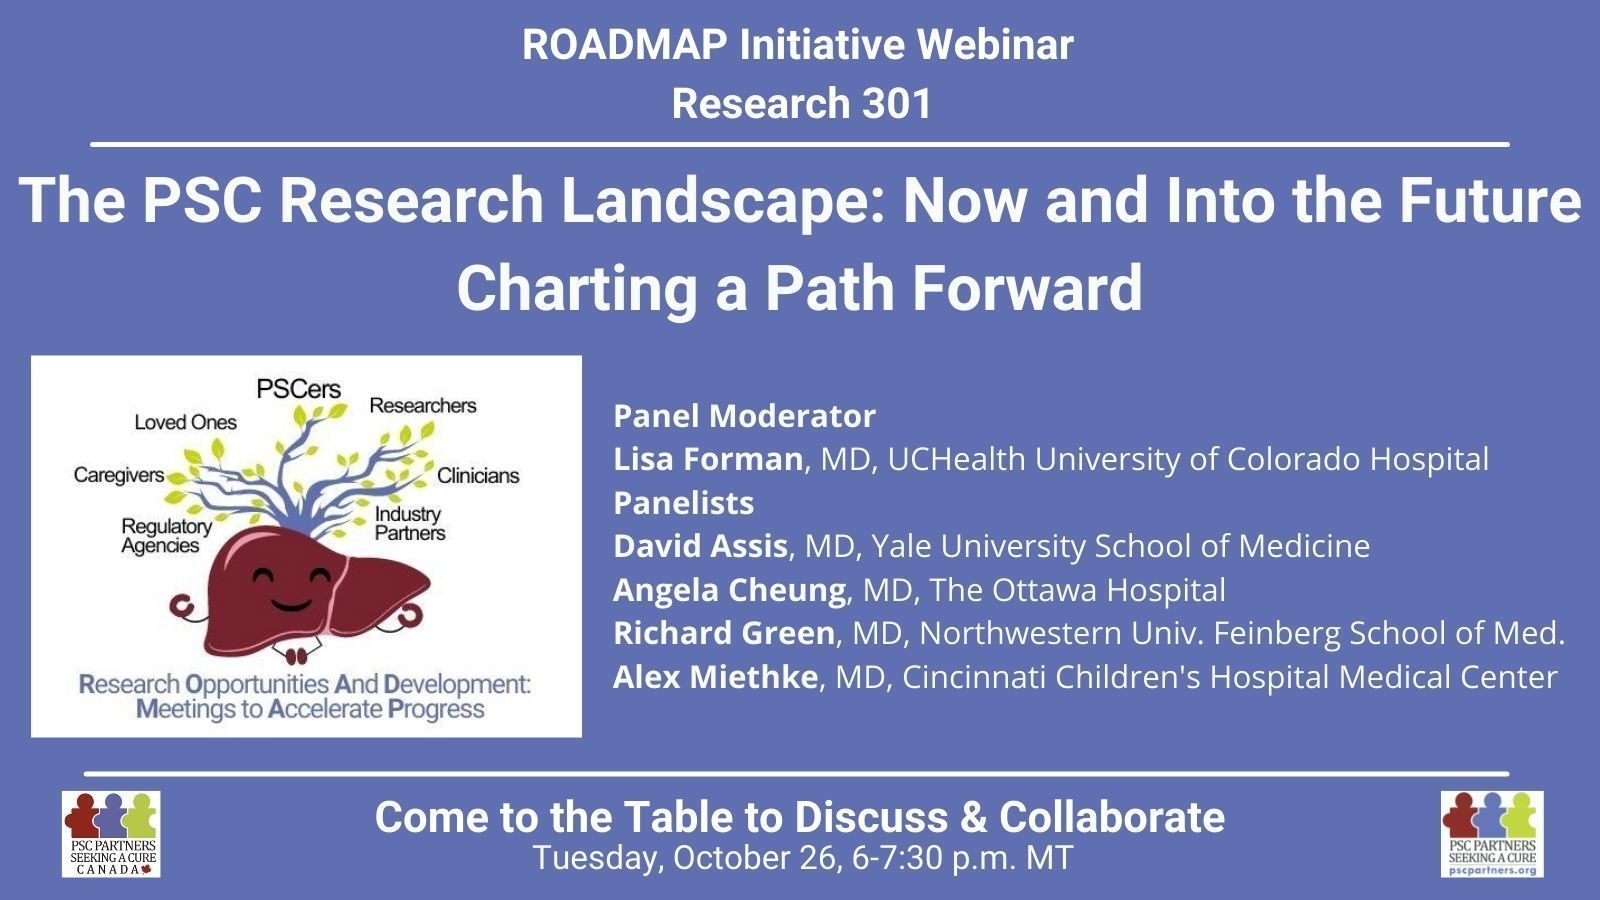 ROADMAP Research 301 --The PSC Research Landscape: Now & Into the Future - Charting a Path Forward